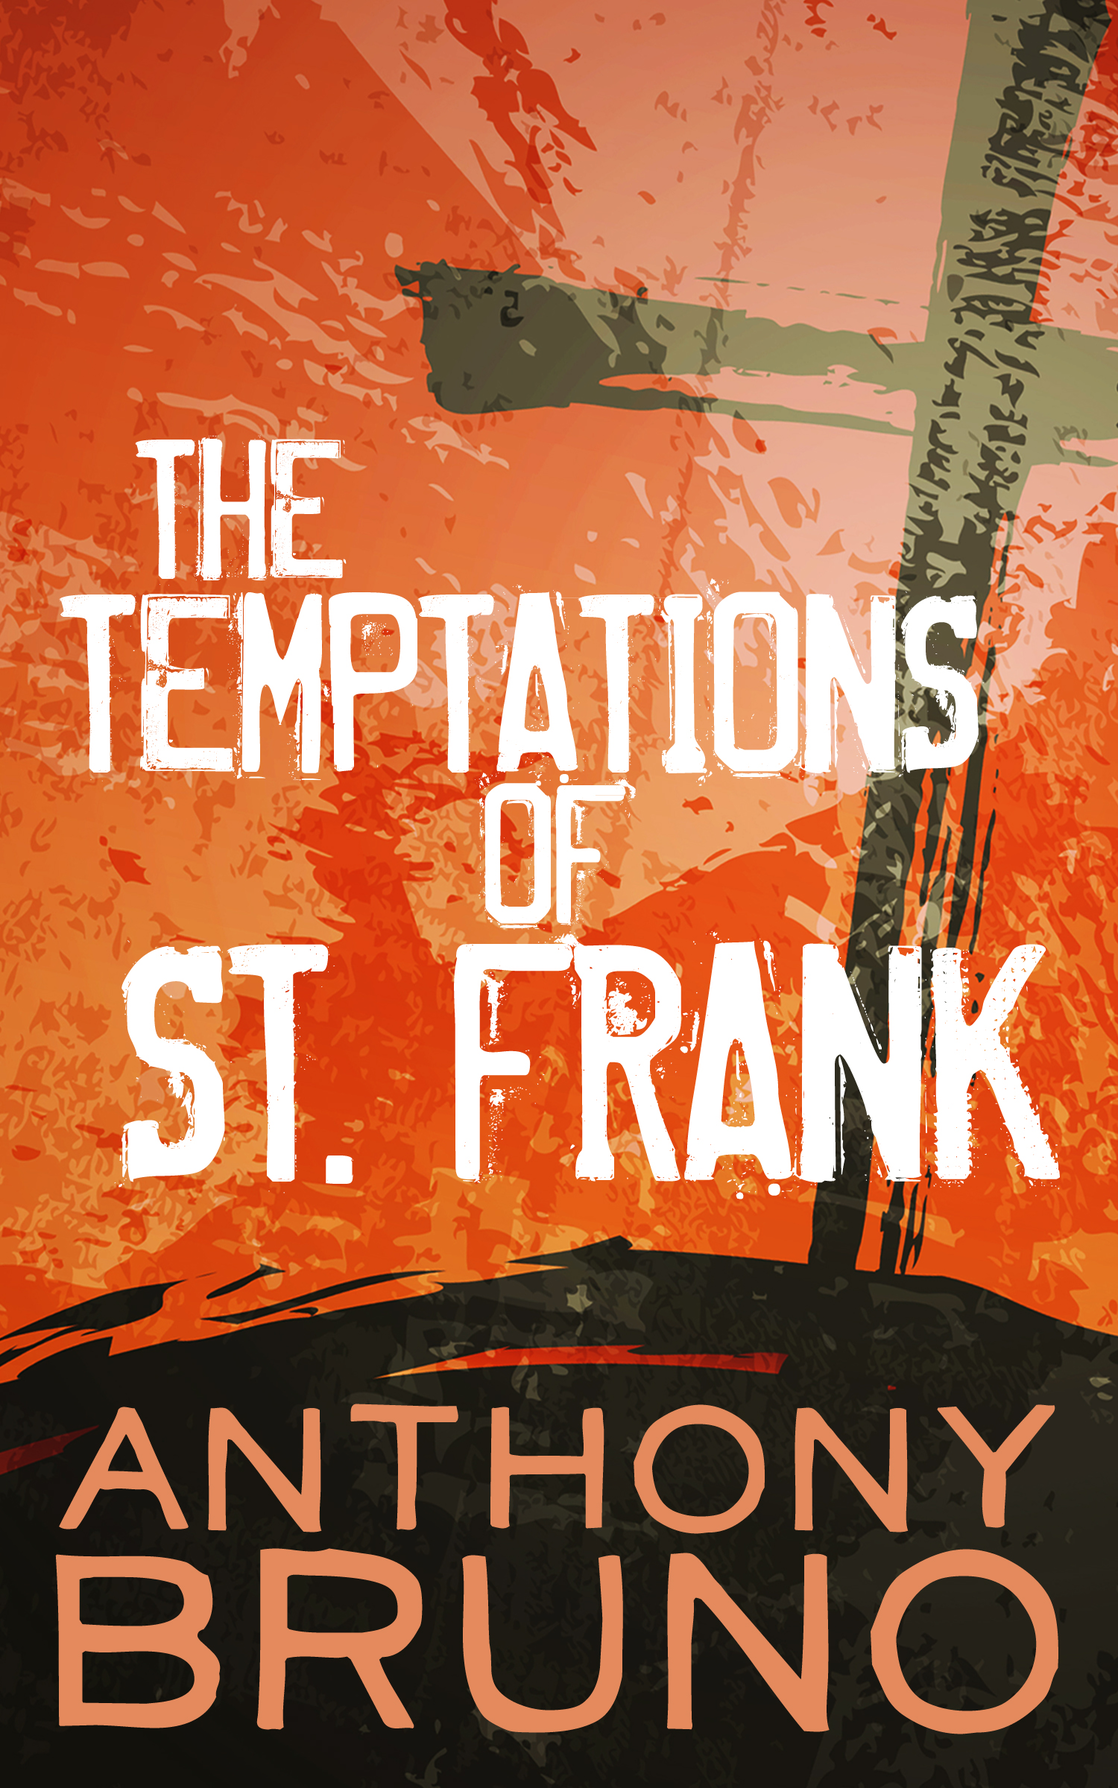 The Temptations of St. Frank (2013)